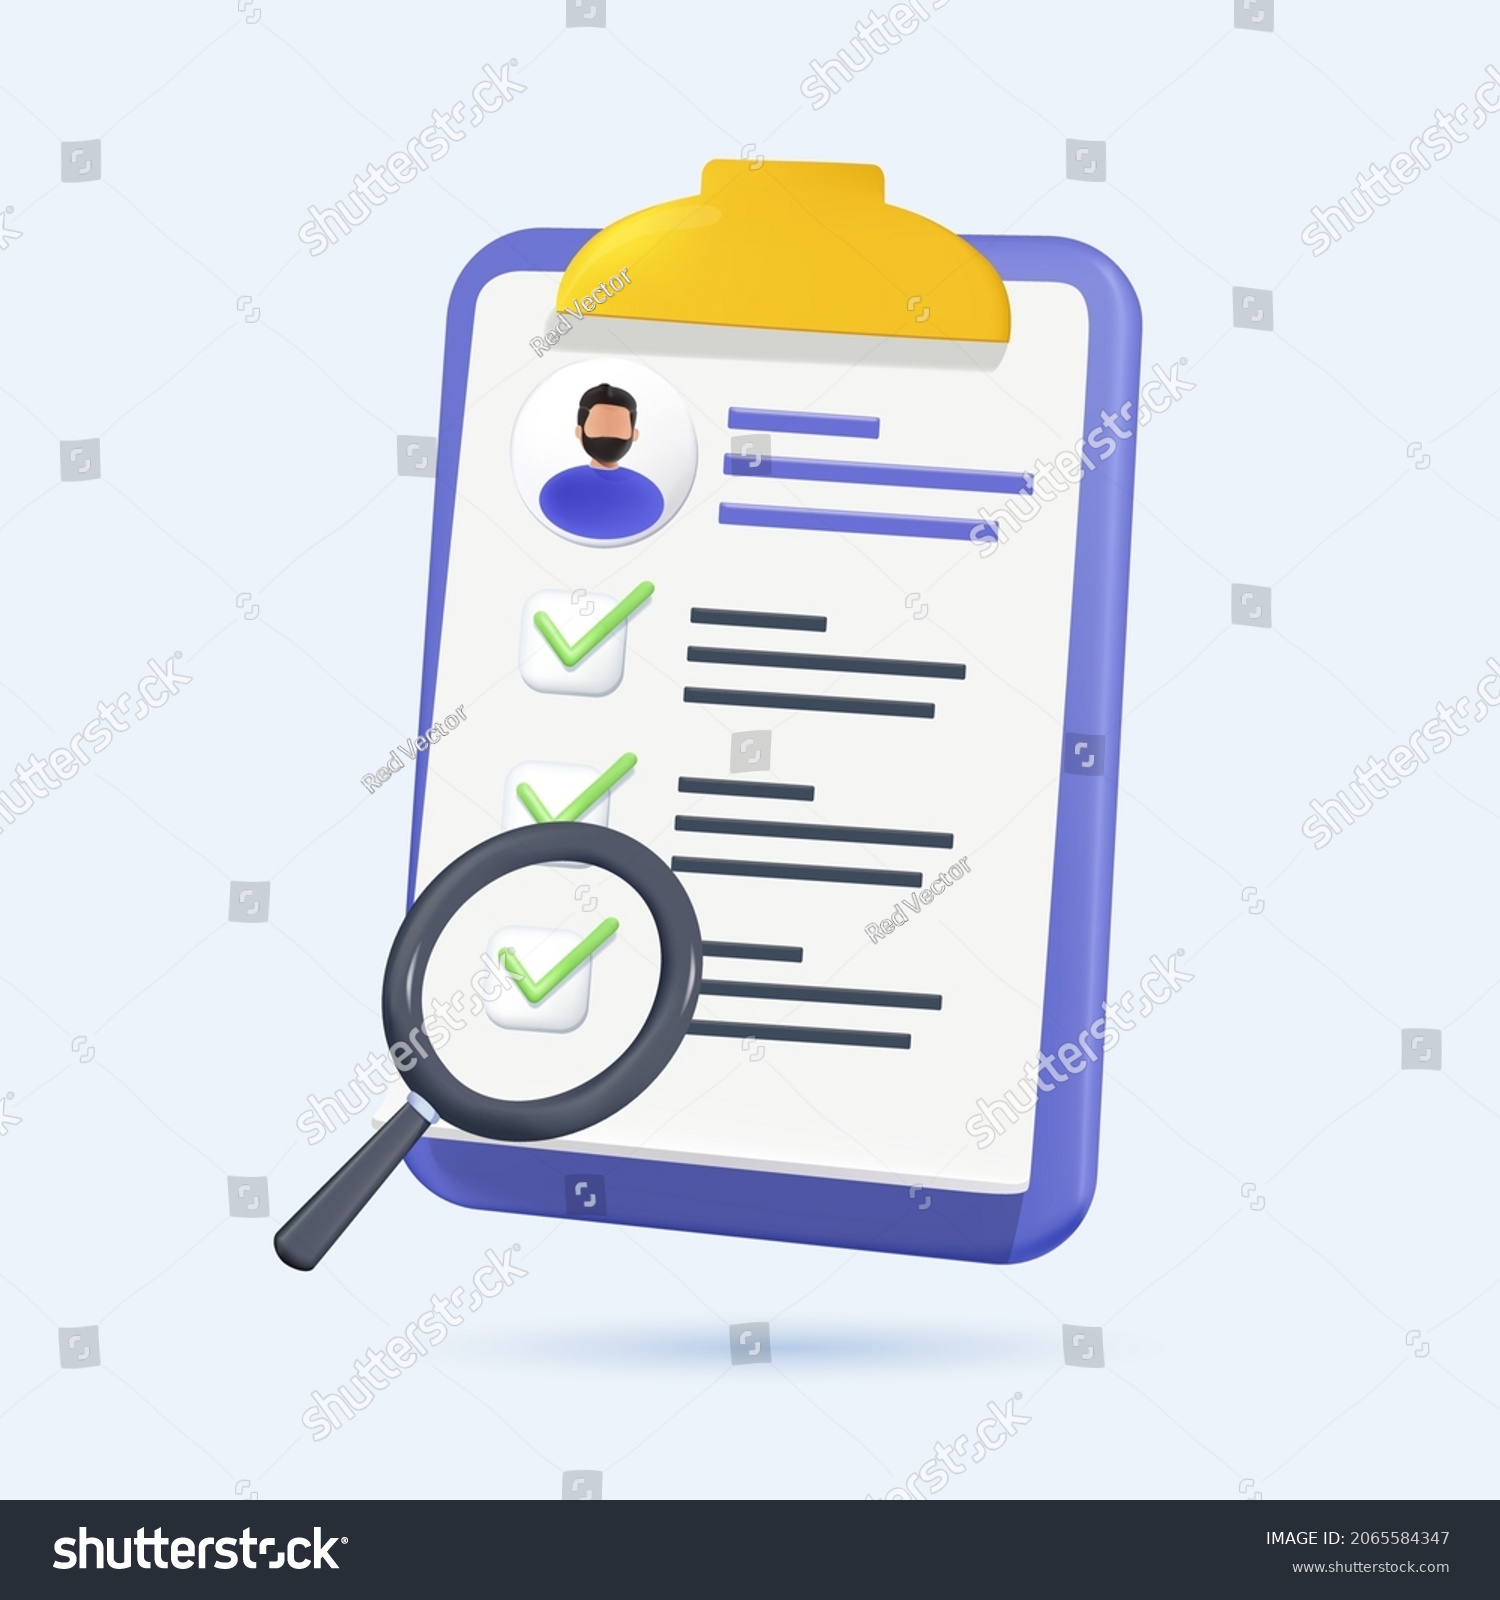 SVG of Resume. Human resource management and hiring concept. Job interview, recruitment agency. 3D Vector Illustrations. Human Resources, Recruitment banner presentation, social media, documents cards svg